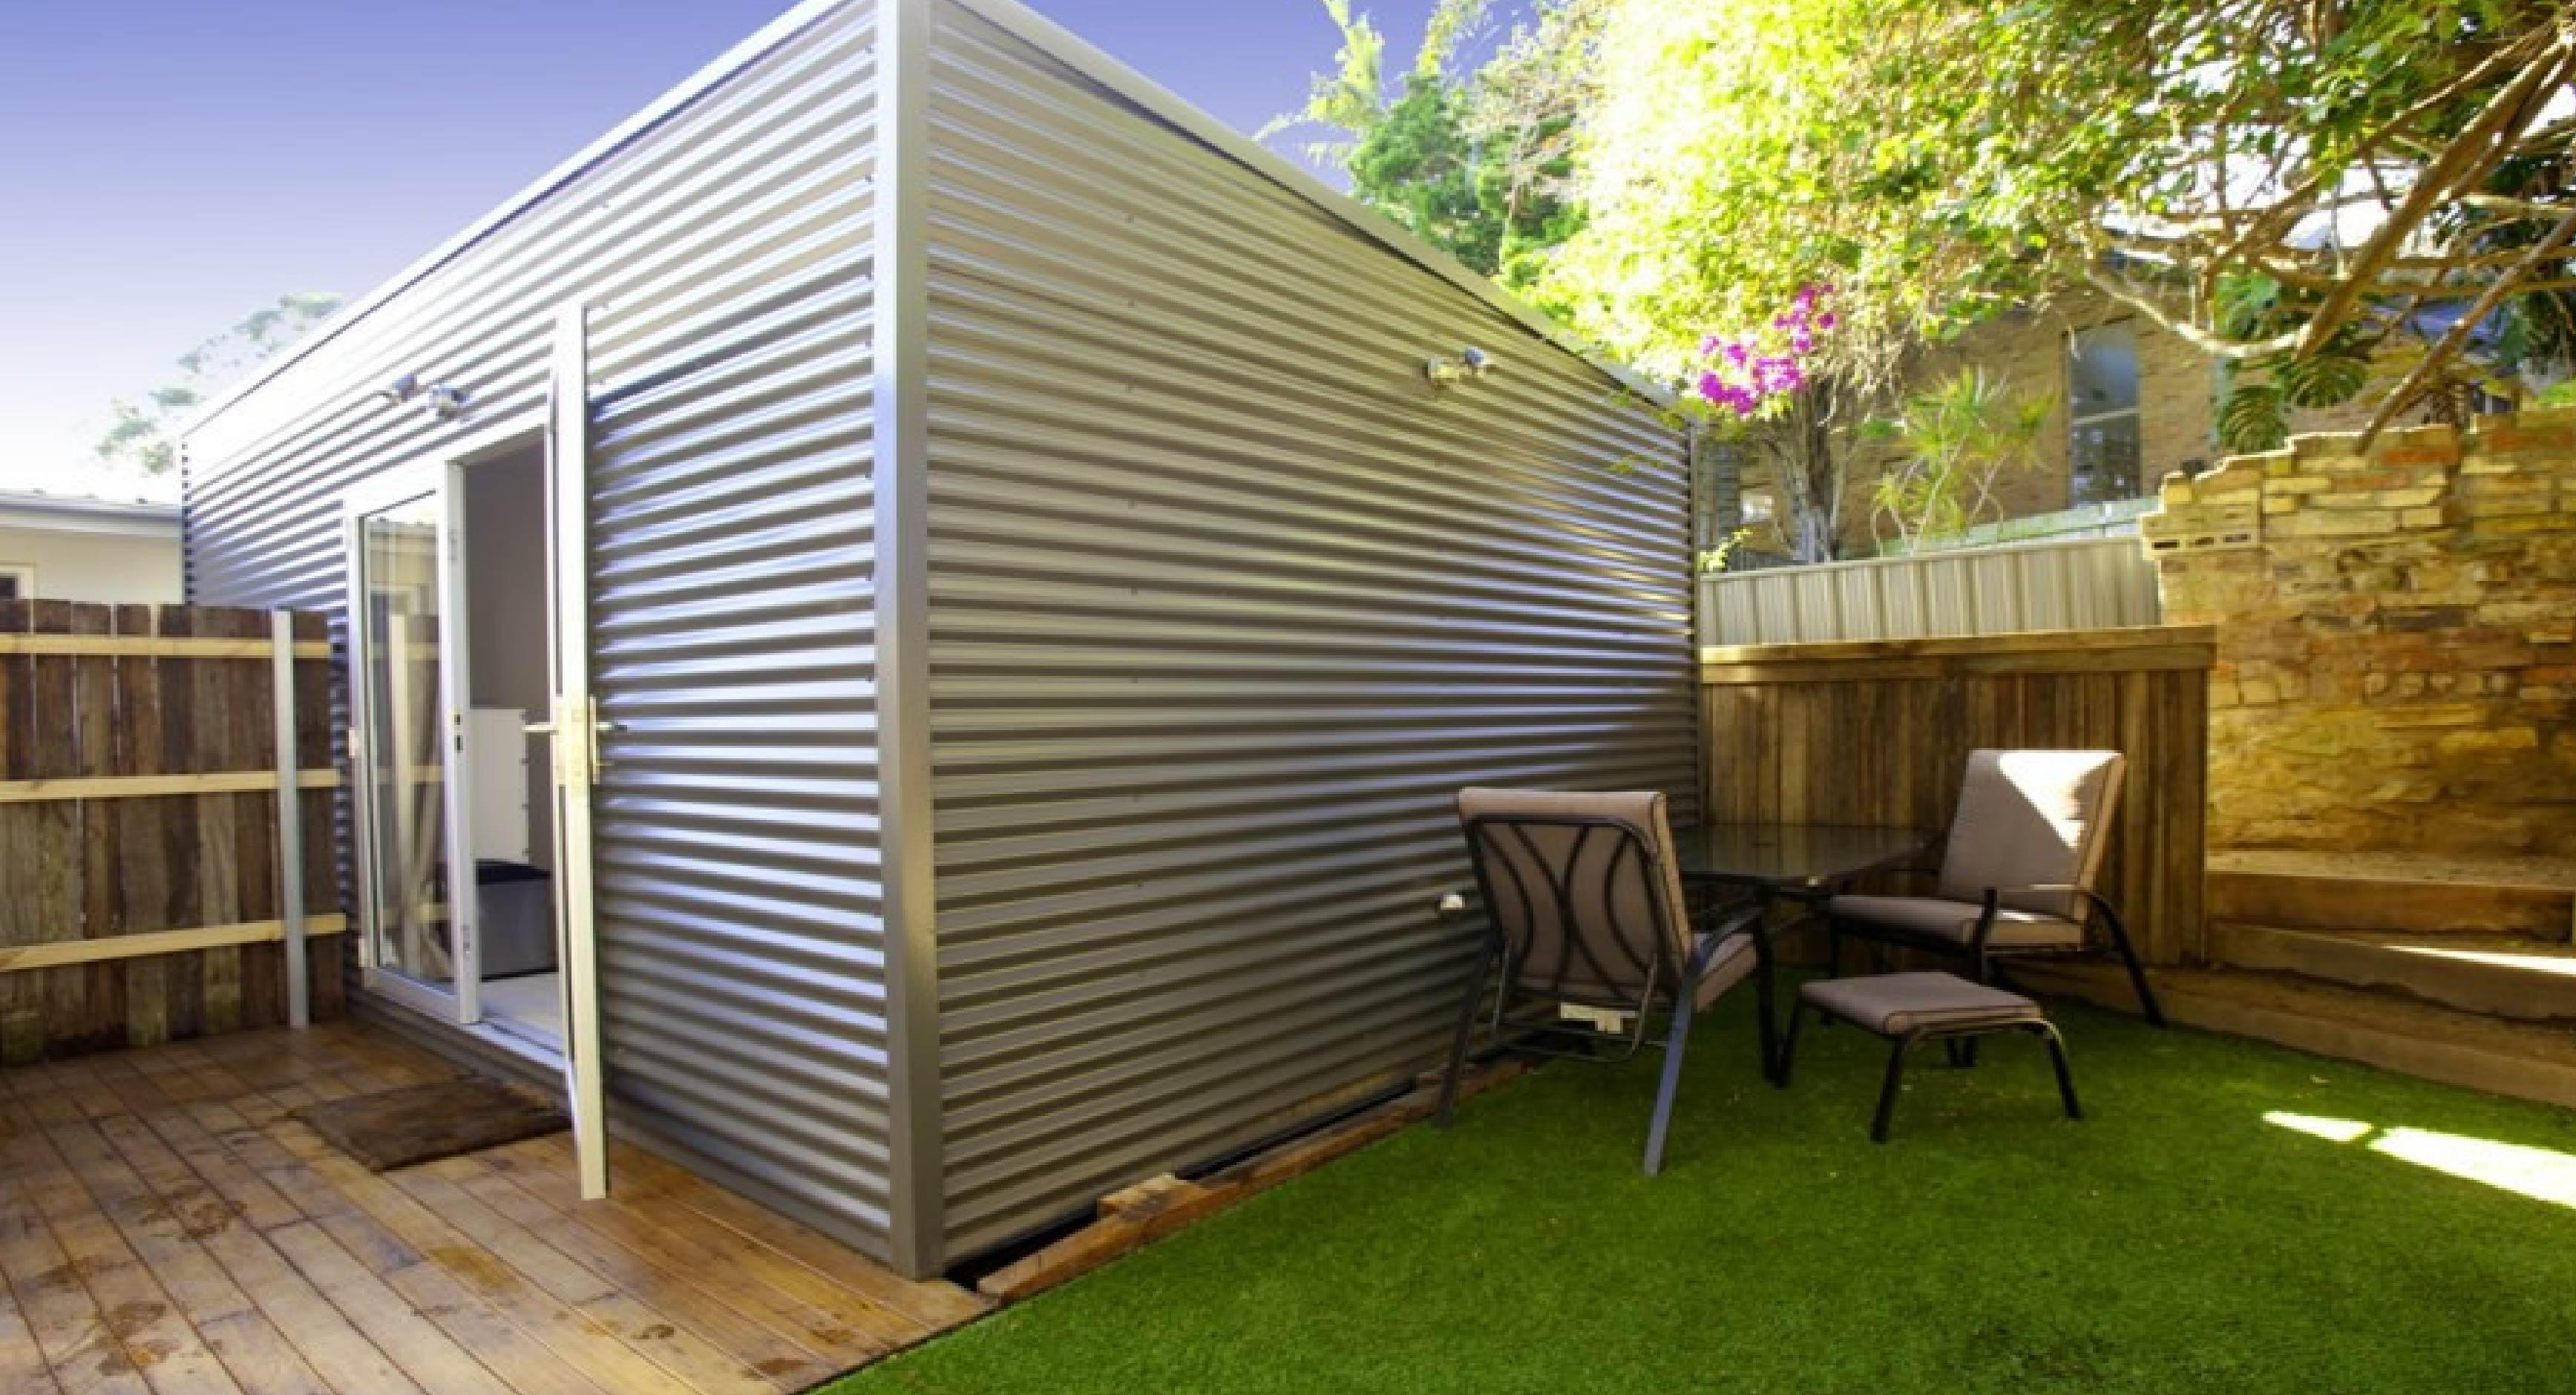 Cairns Storage Sheds Listitdallas with dimensions 3471 X 1880